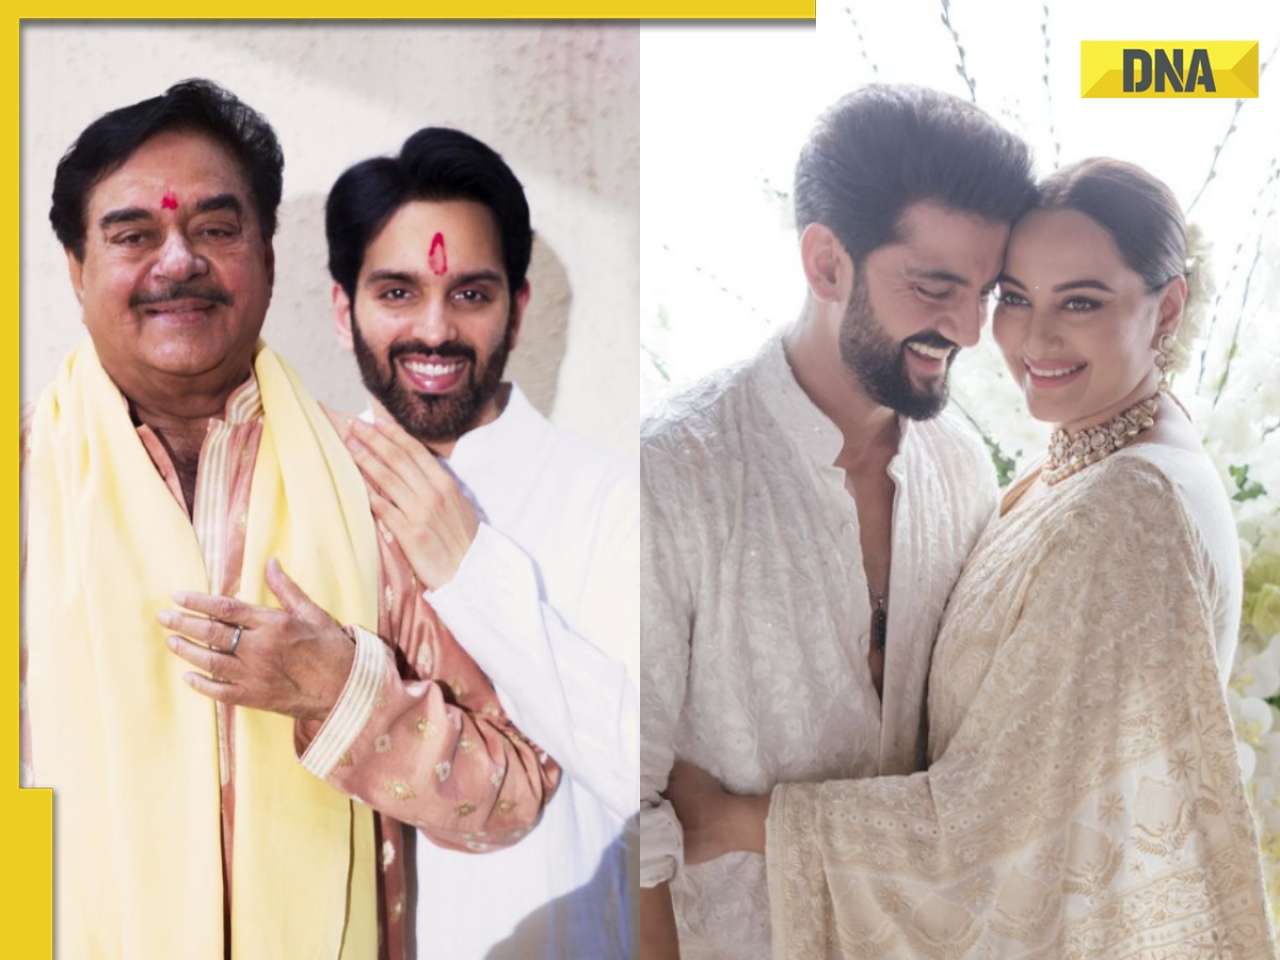 Shatrughan Sinha breaks his silence on Luv's objection over Sonakshi, Zaheer's marriage: 'We may disagree, argue on...'